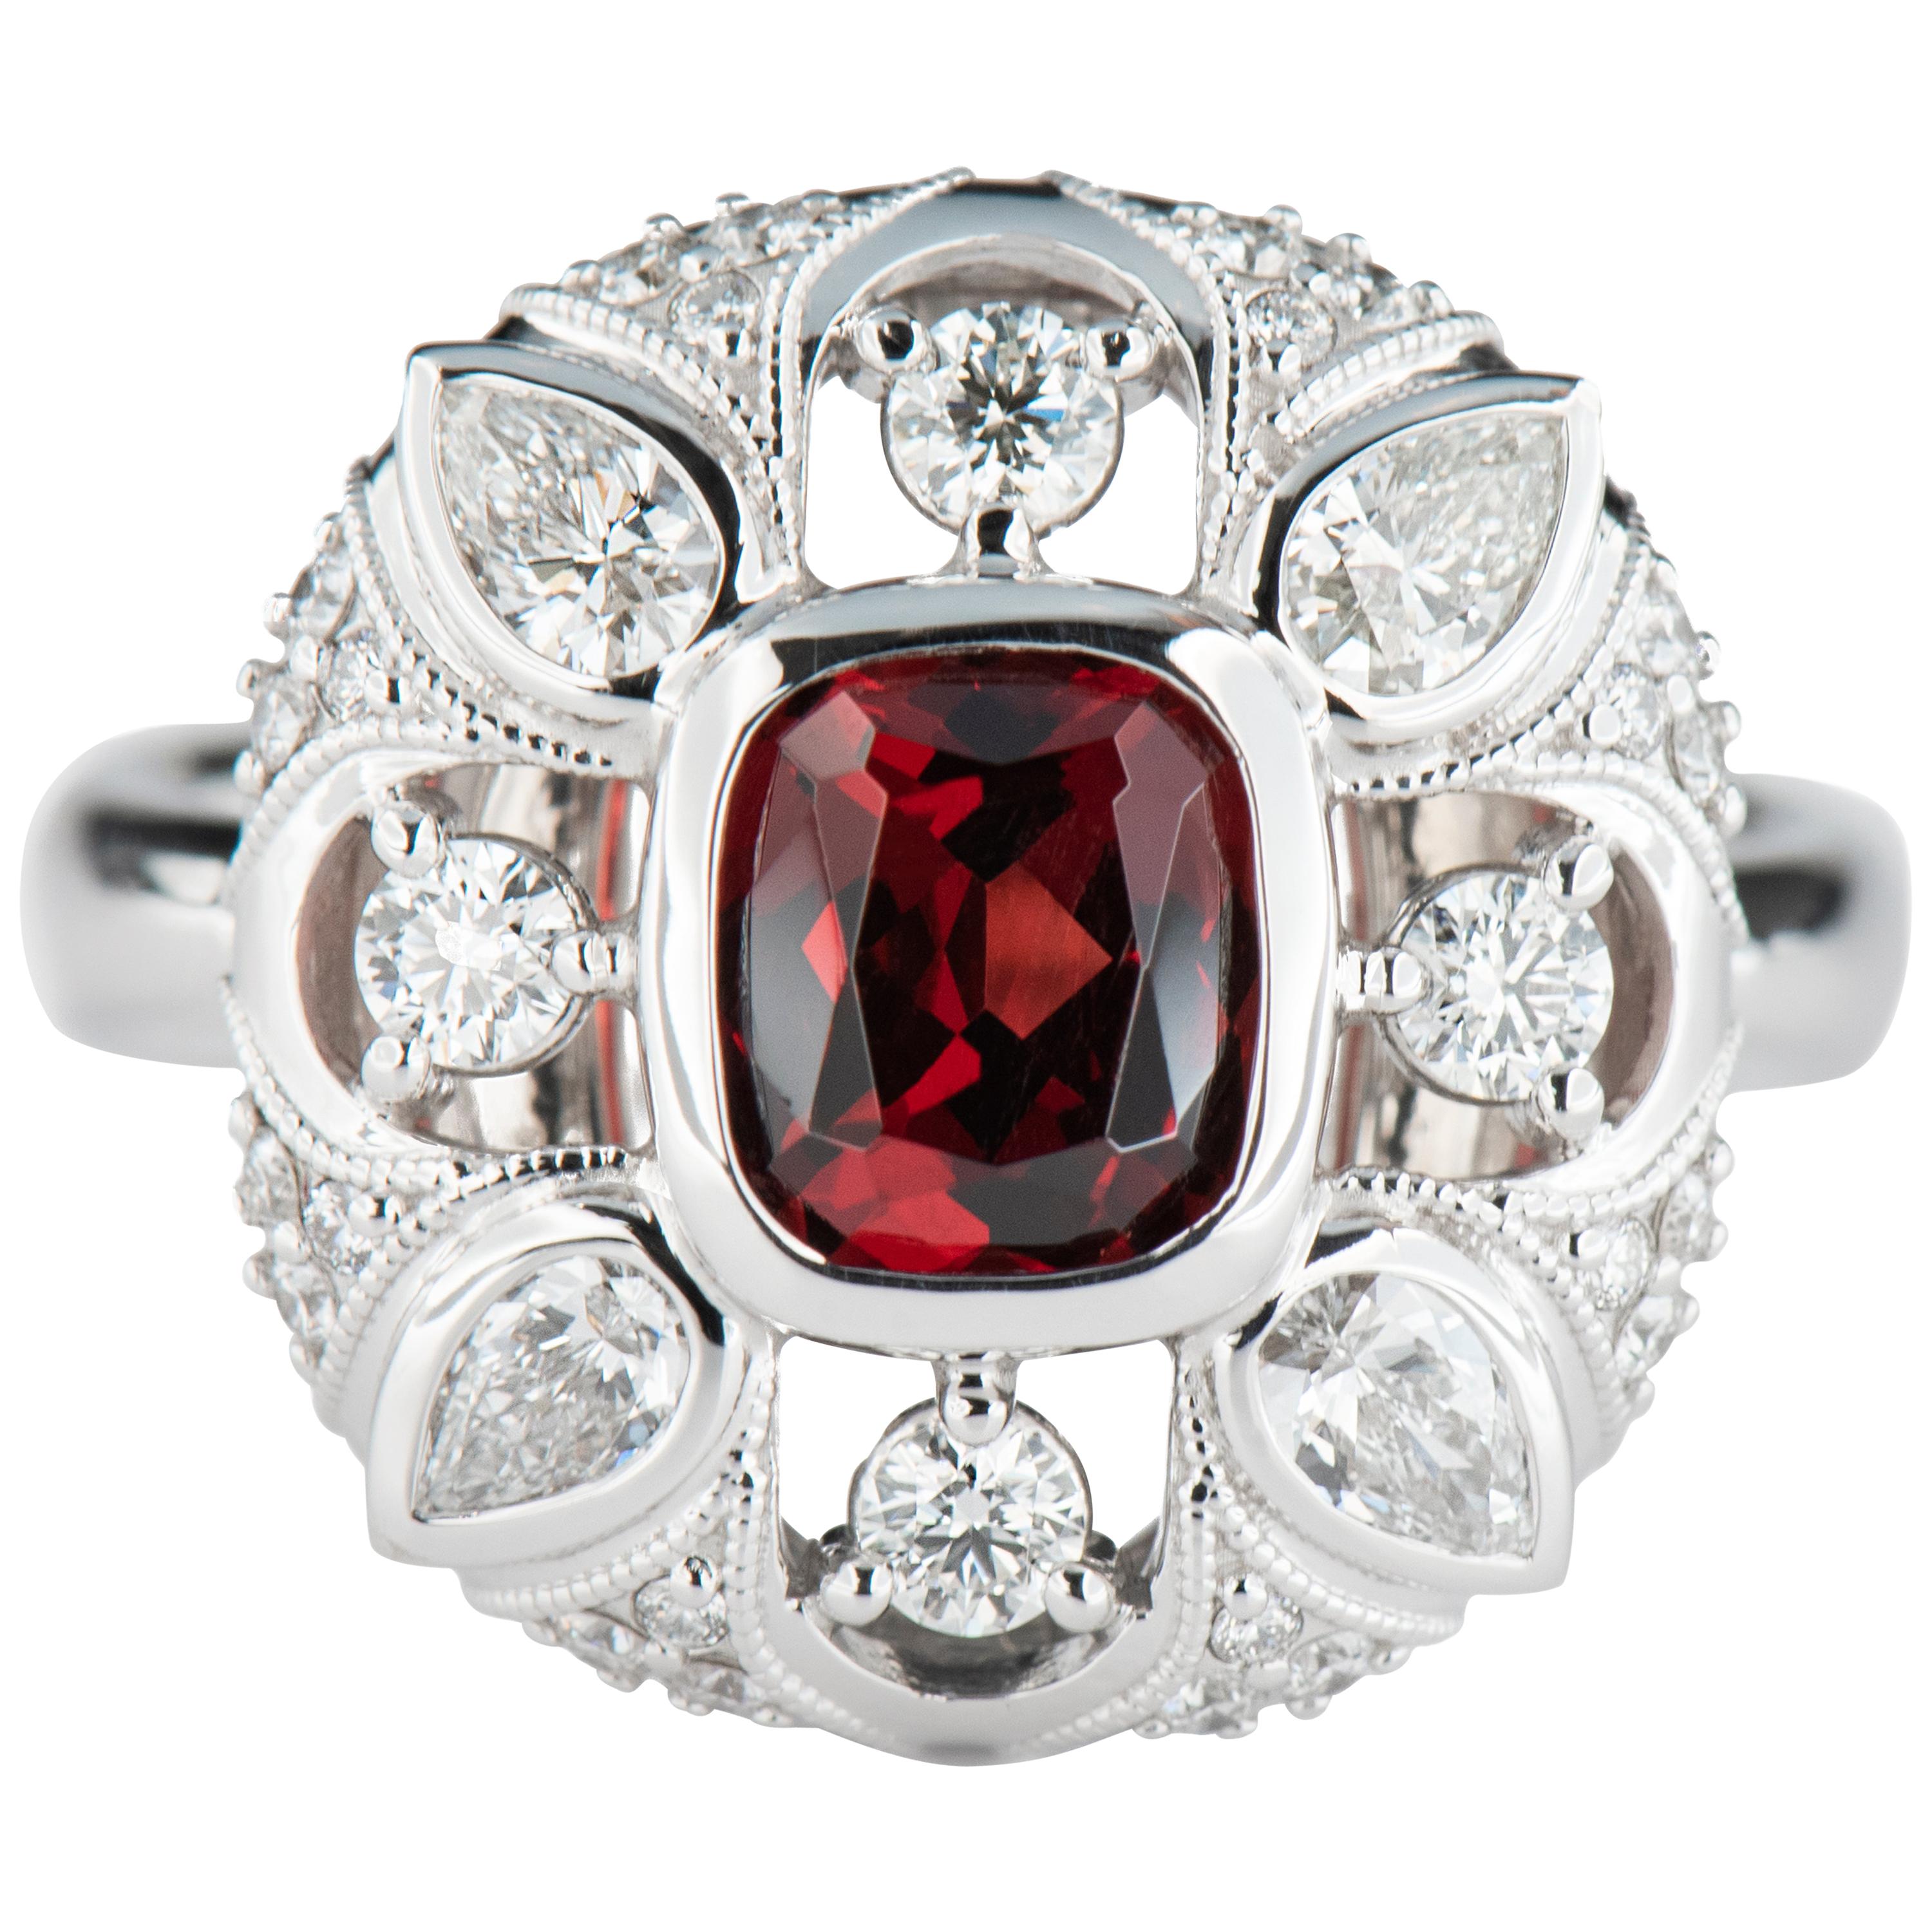 White Gold 1.51 Carat Cushion Red Spinel Cocktail Ring with Diamond Accents For Sale